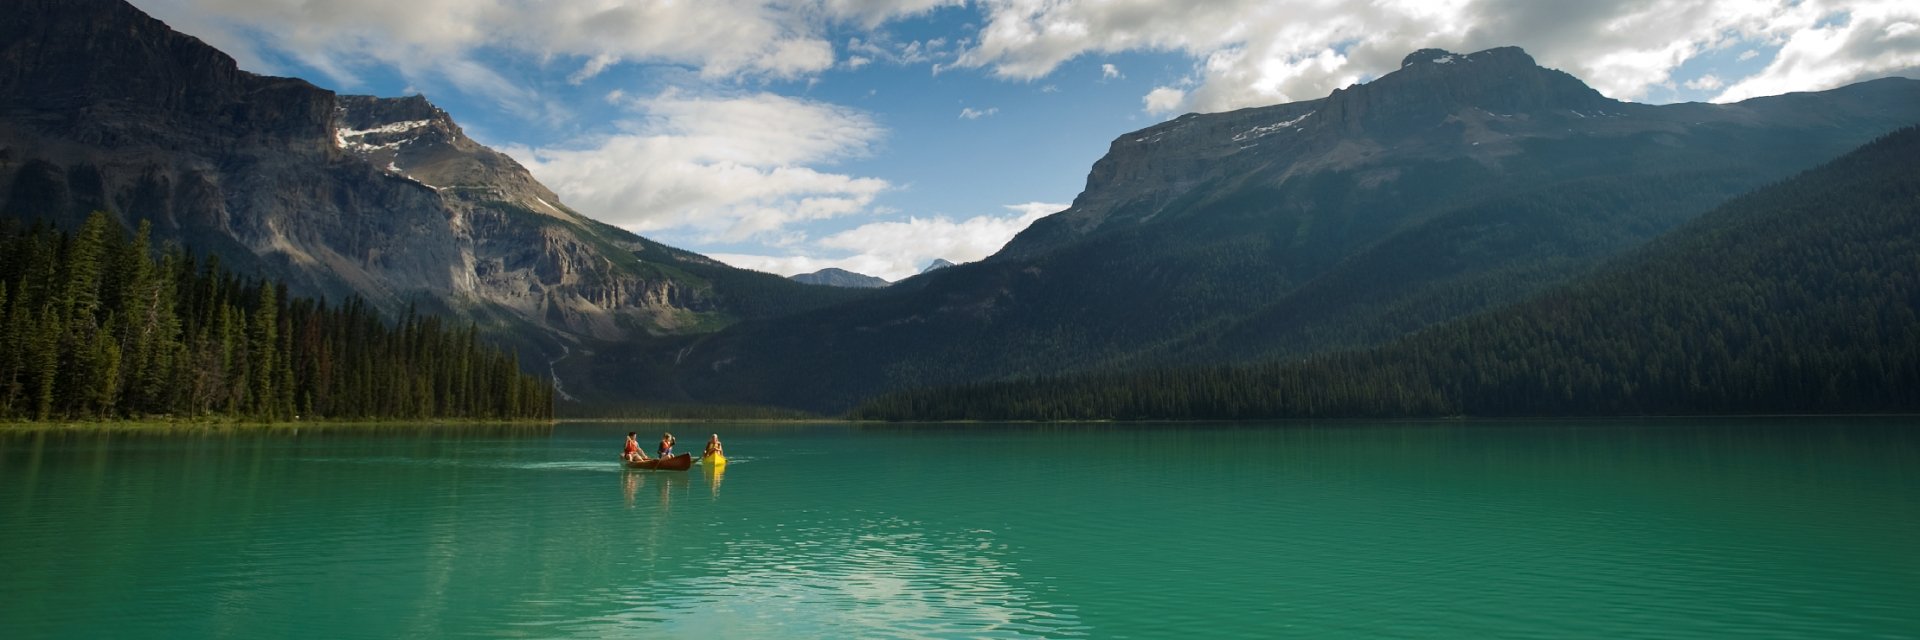 Two couples canoeing on Emerald Lake with views of the mountains in Yoho National Park near Field.